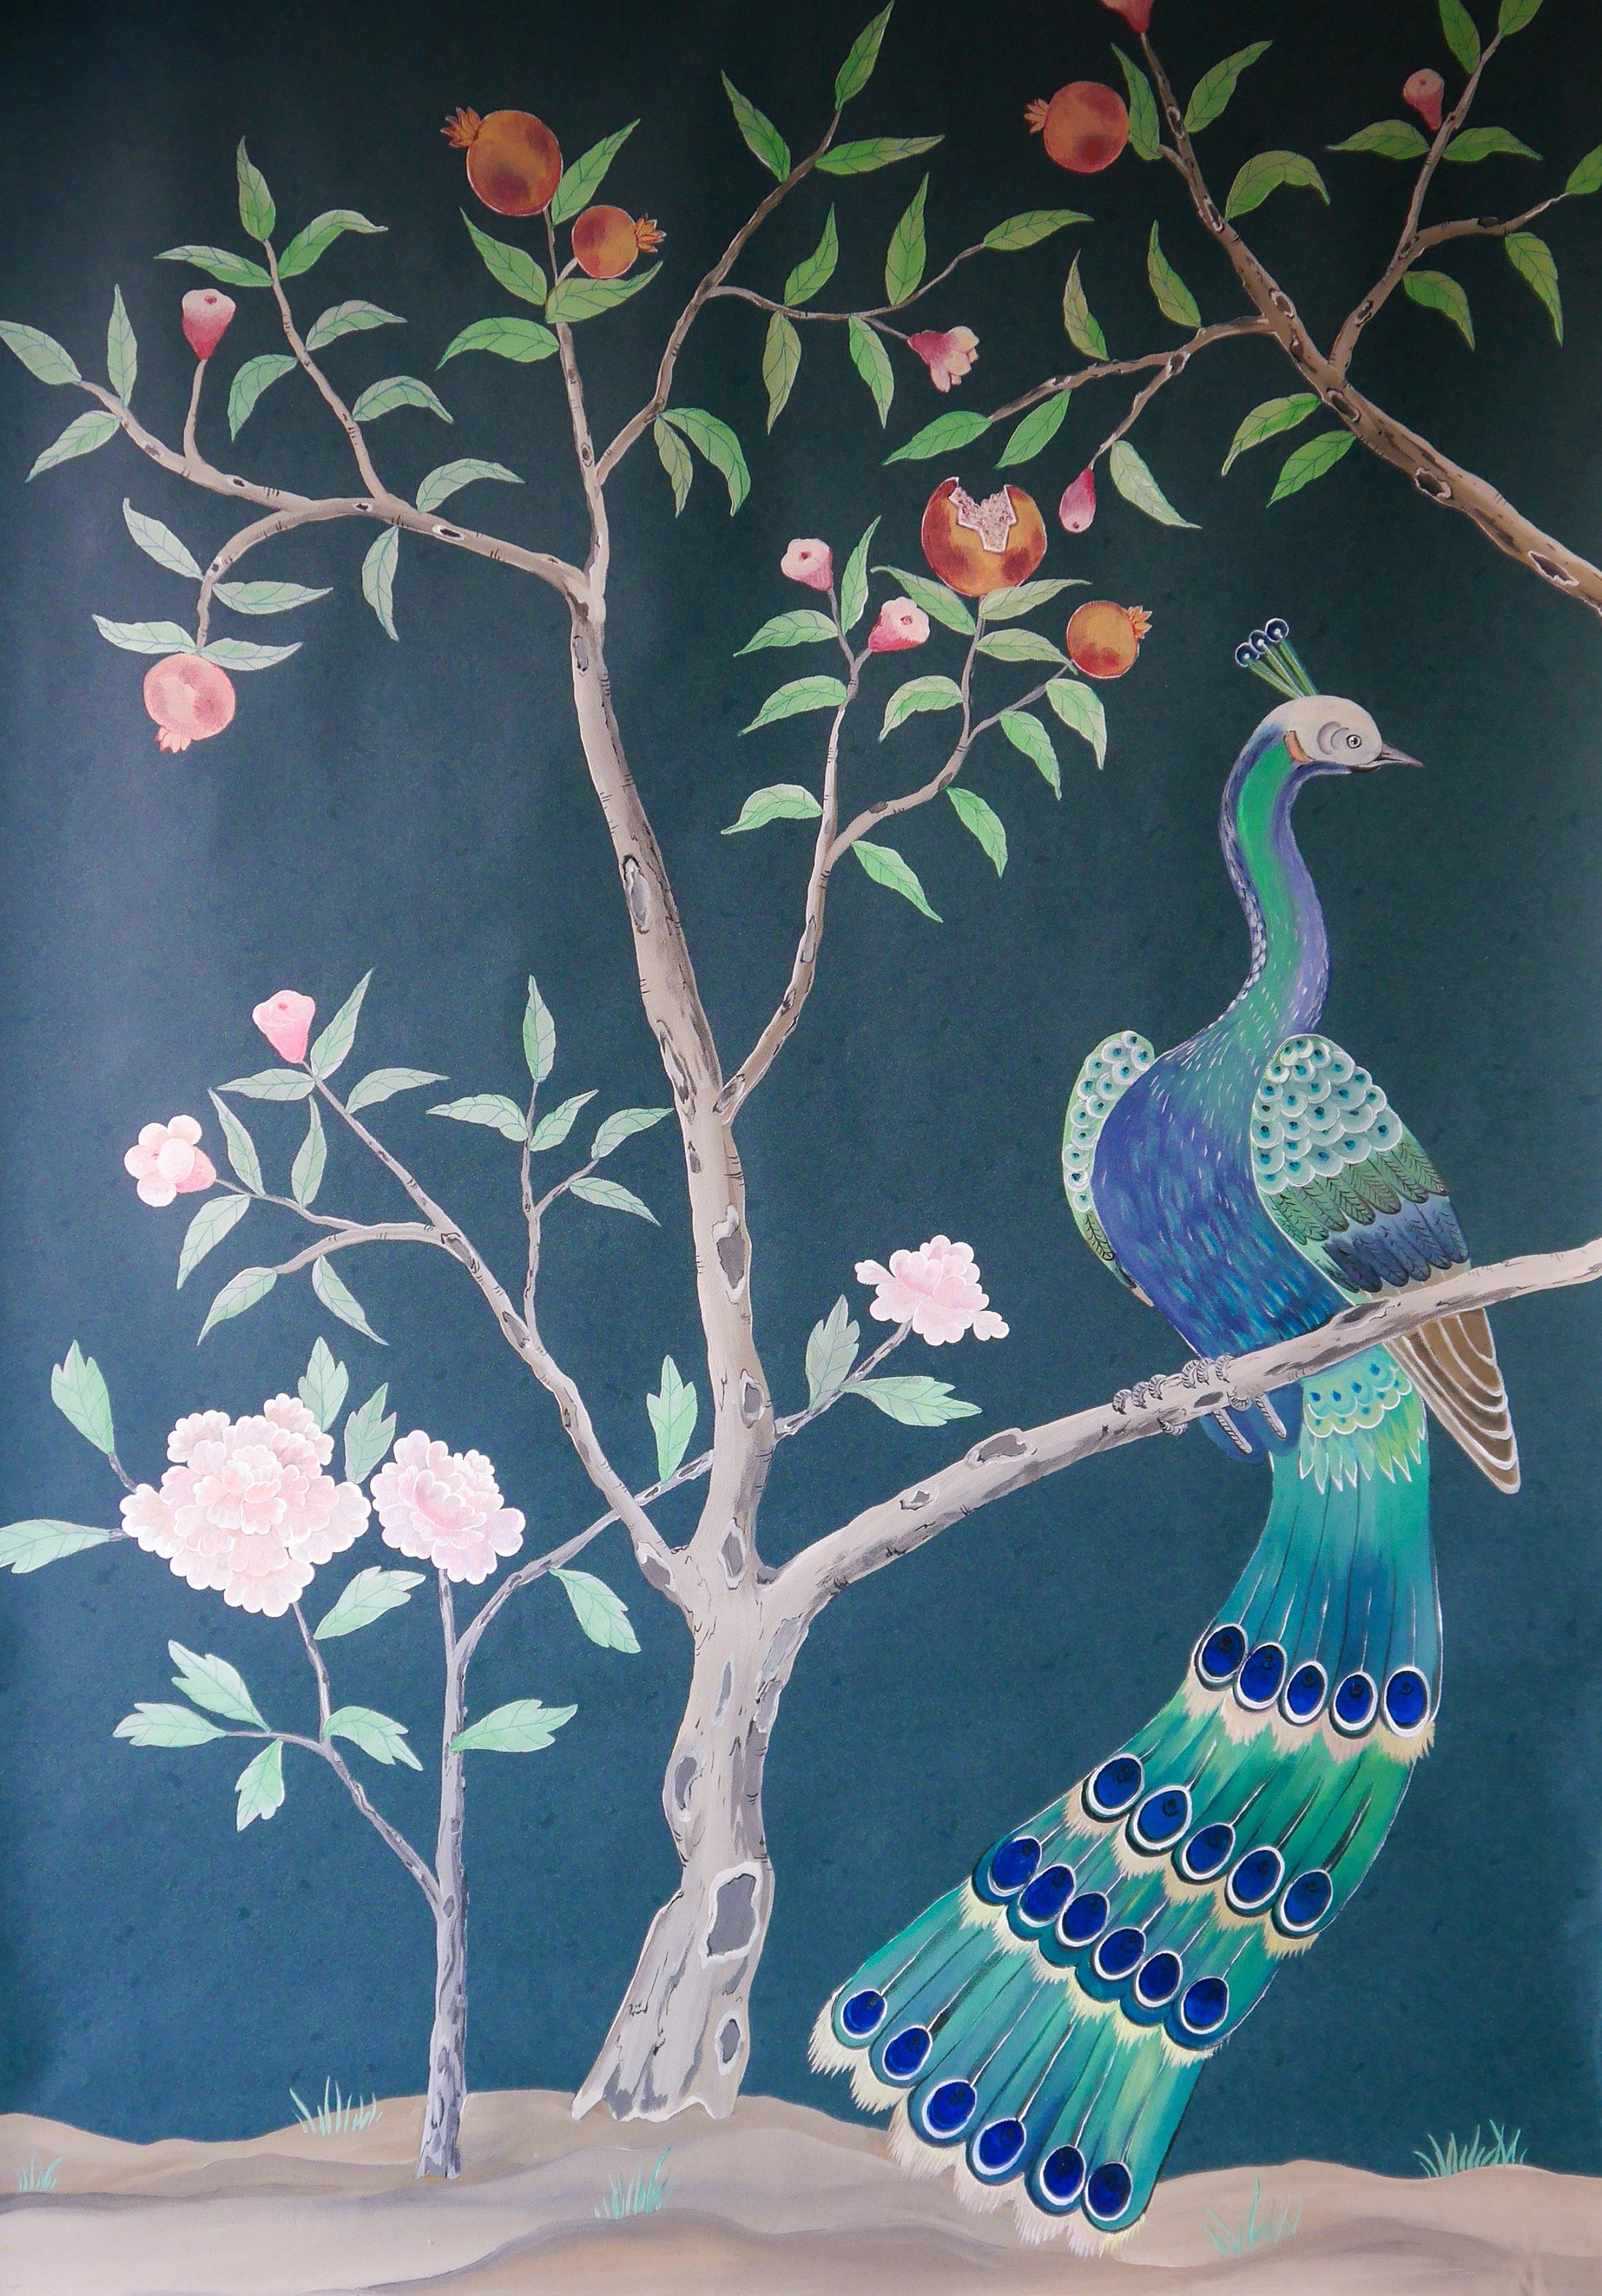 Peacock garden on teal leather look background: an enchanted garden, featuring peacocks on pomegranate trees, inspired by a Qing Dynasty original. A set of three panels.

Our wallpapers and panels are produced with love and patience, the artists